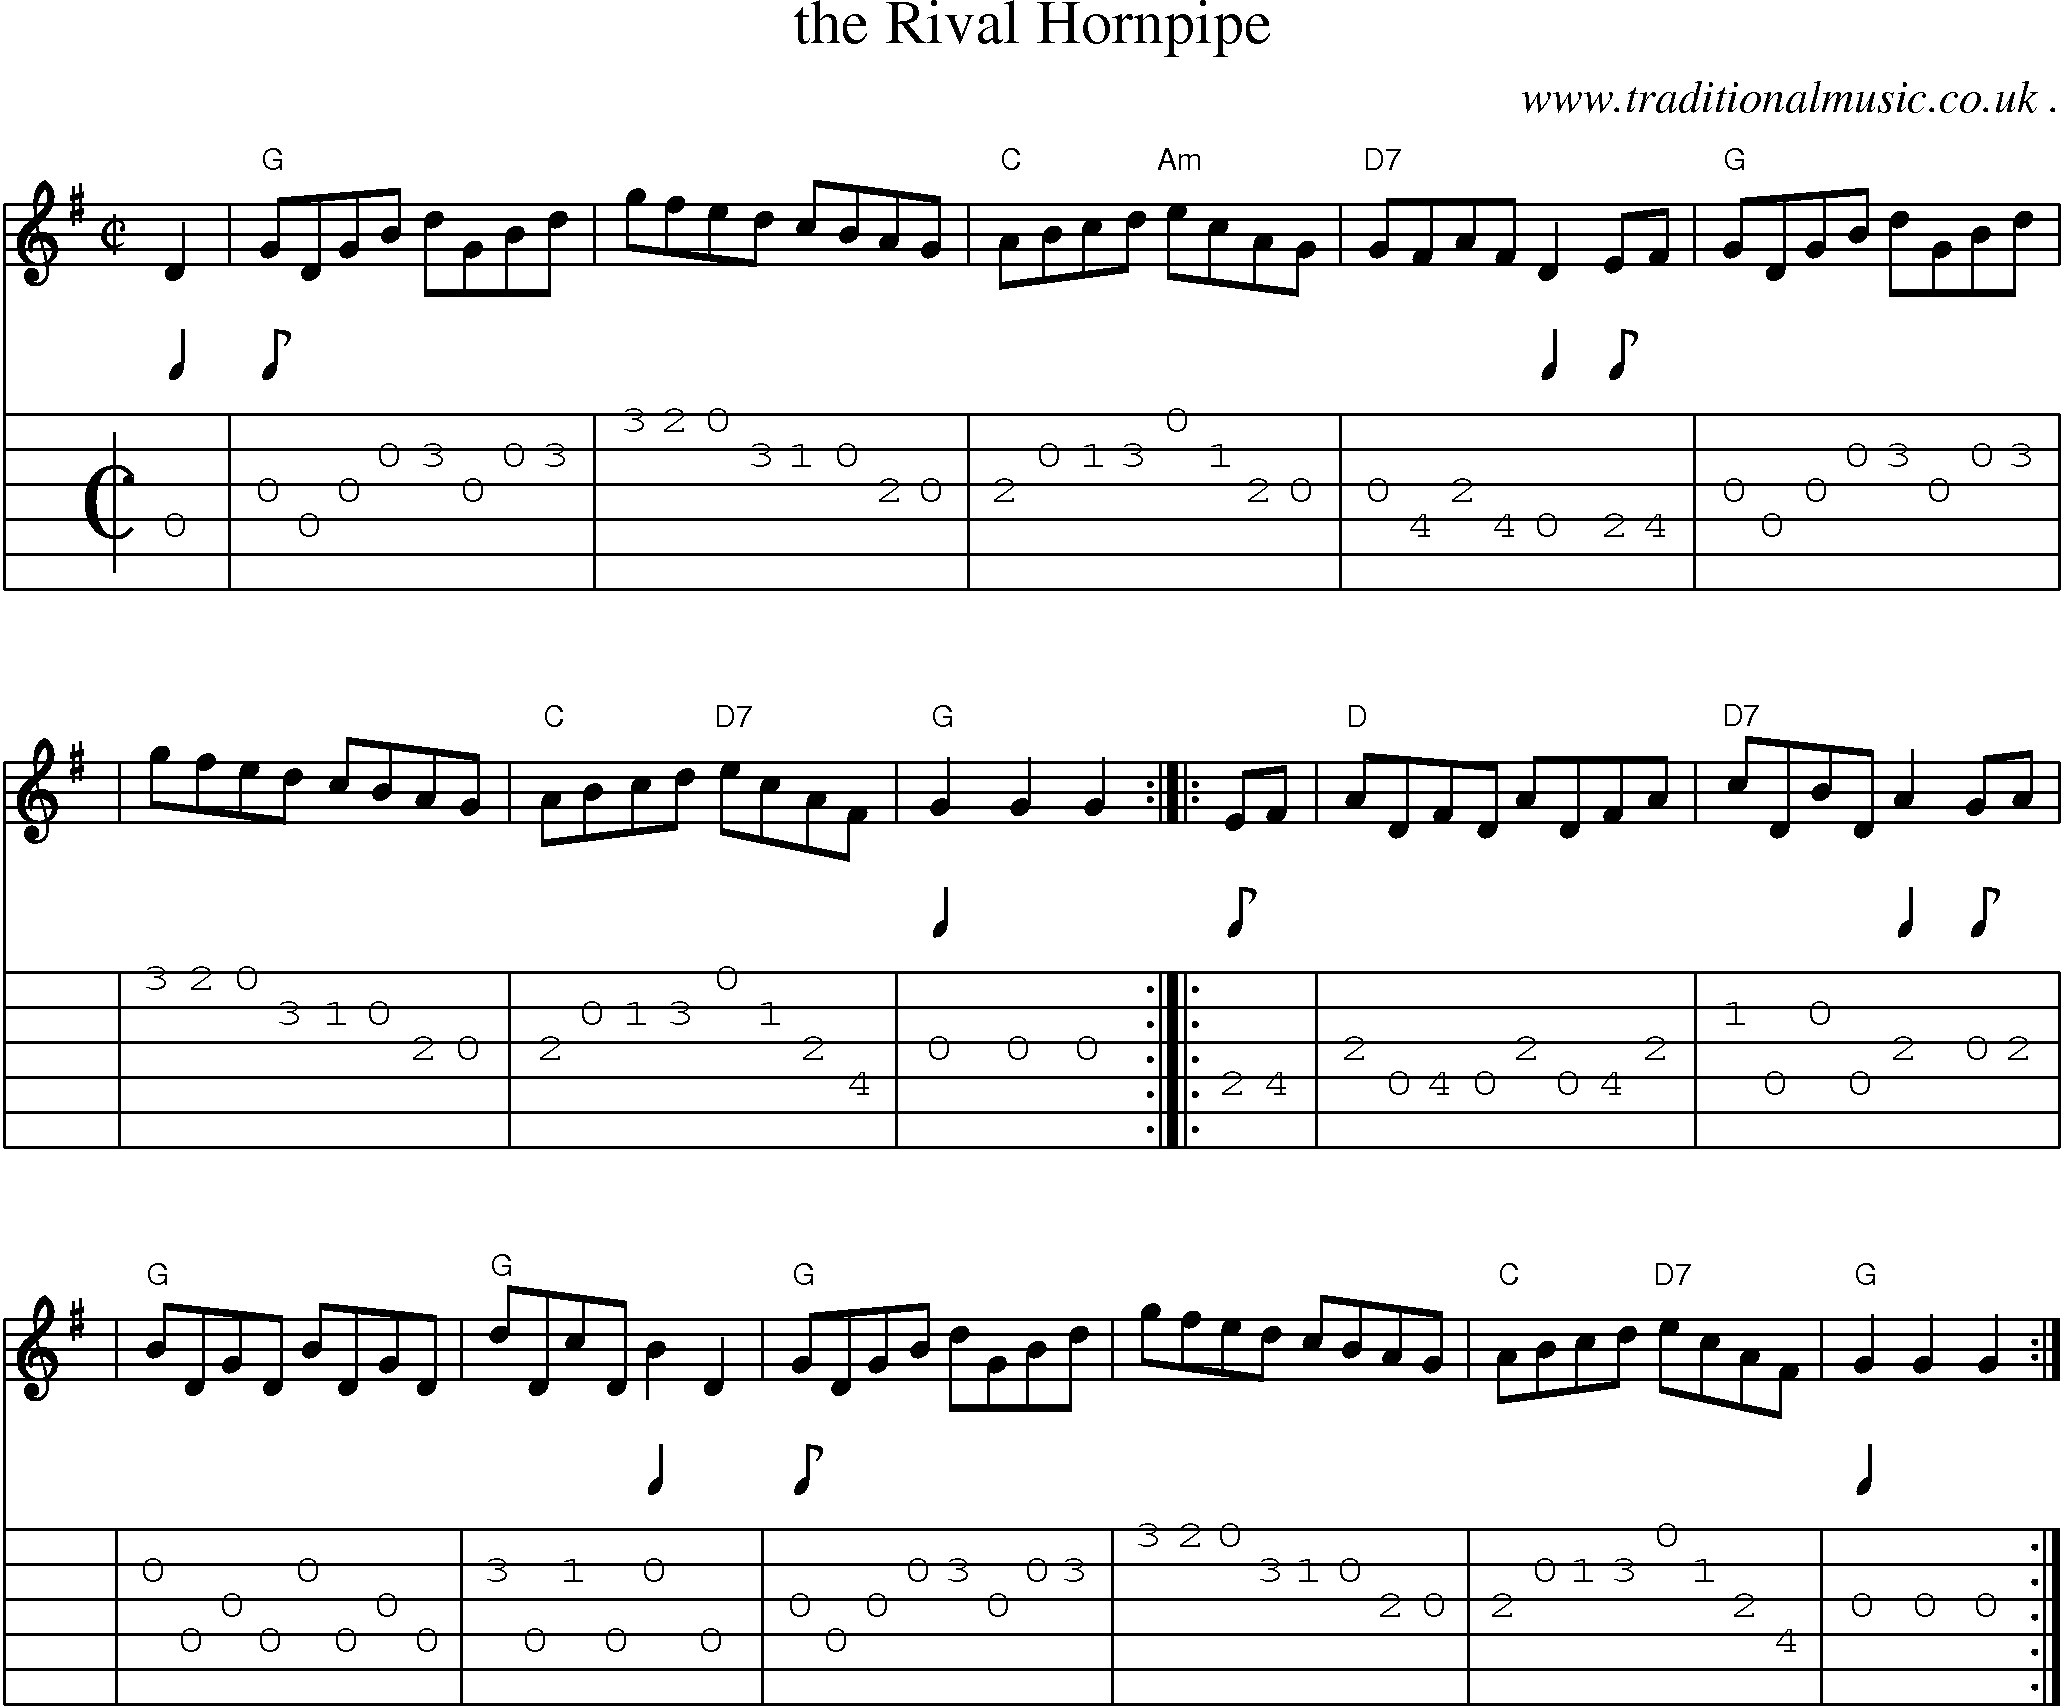 Sheet-music  score, Chords and Guitar Tabs for The Rival Hornpipe